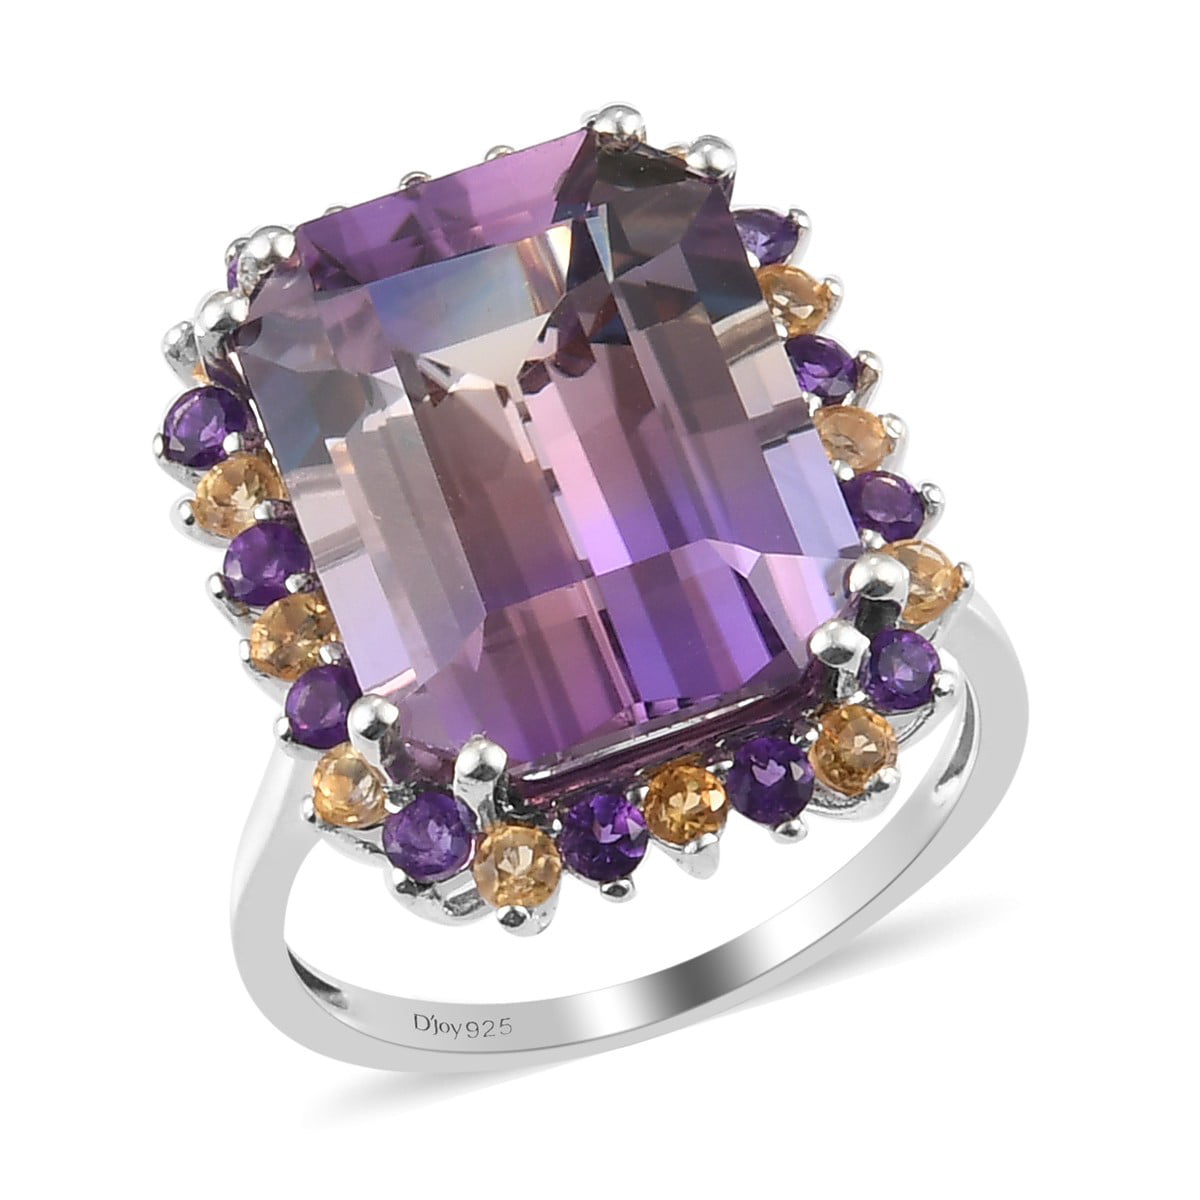 Shop LC Delivering Joy Solitaire Ring Stainless Steel Octagon Amethyst Gift Jewelry for Women Size 9 Cttw 2.6